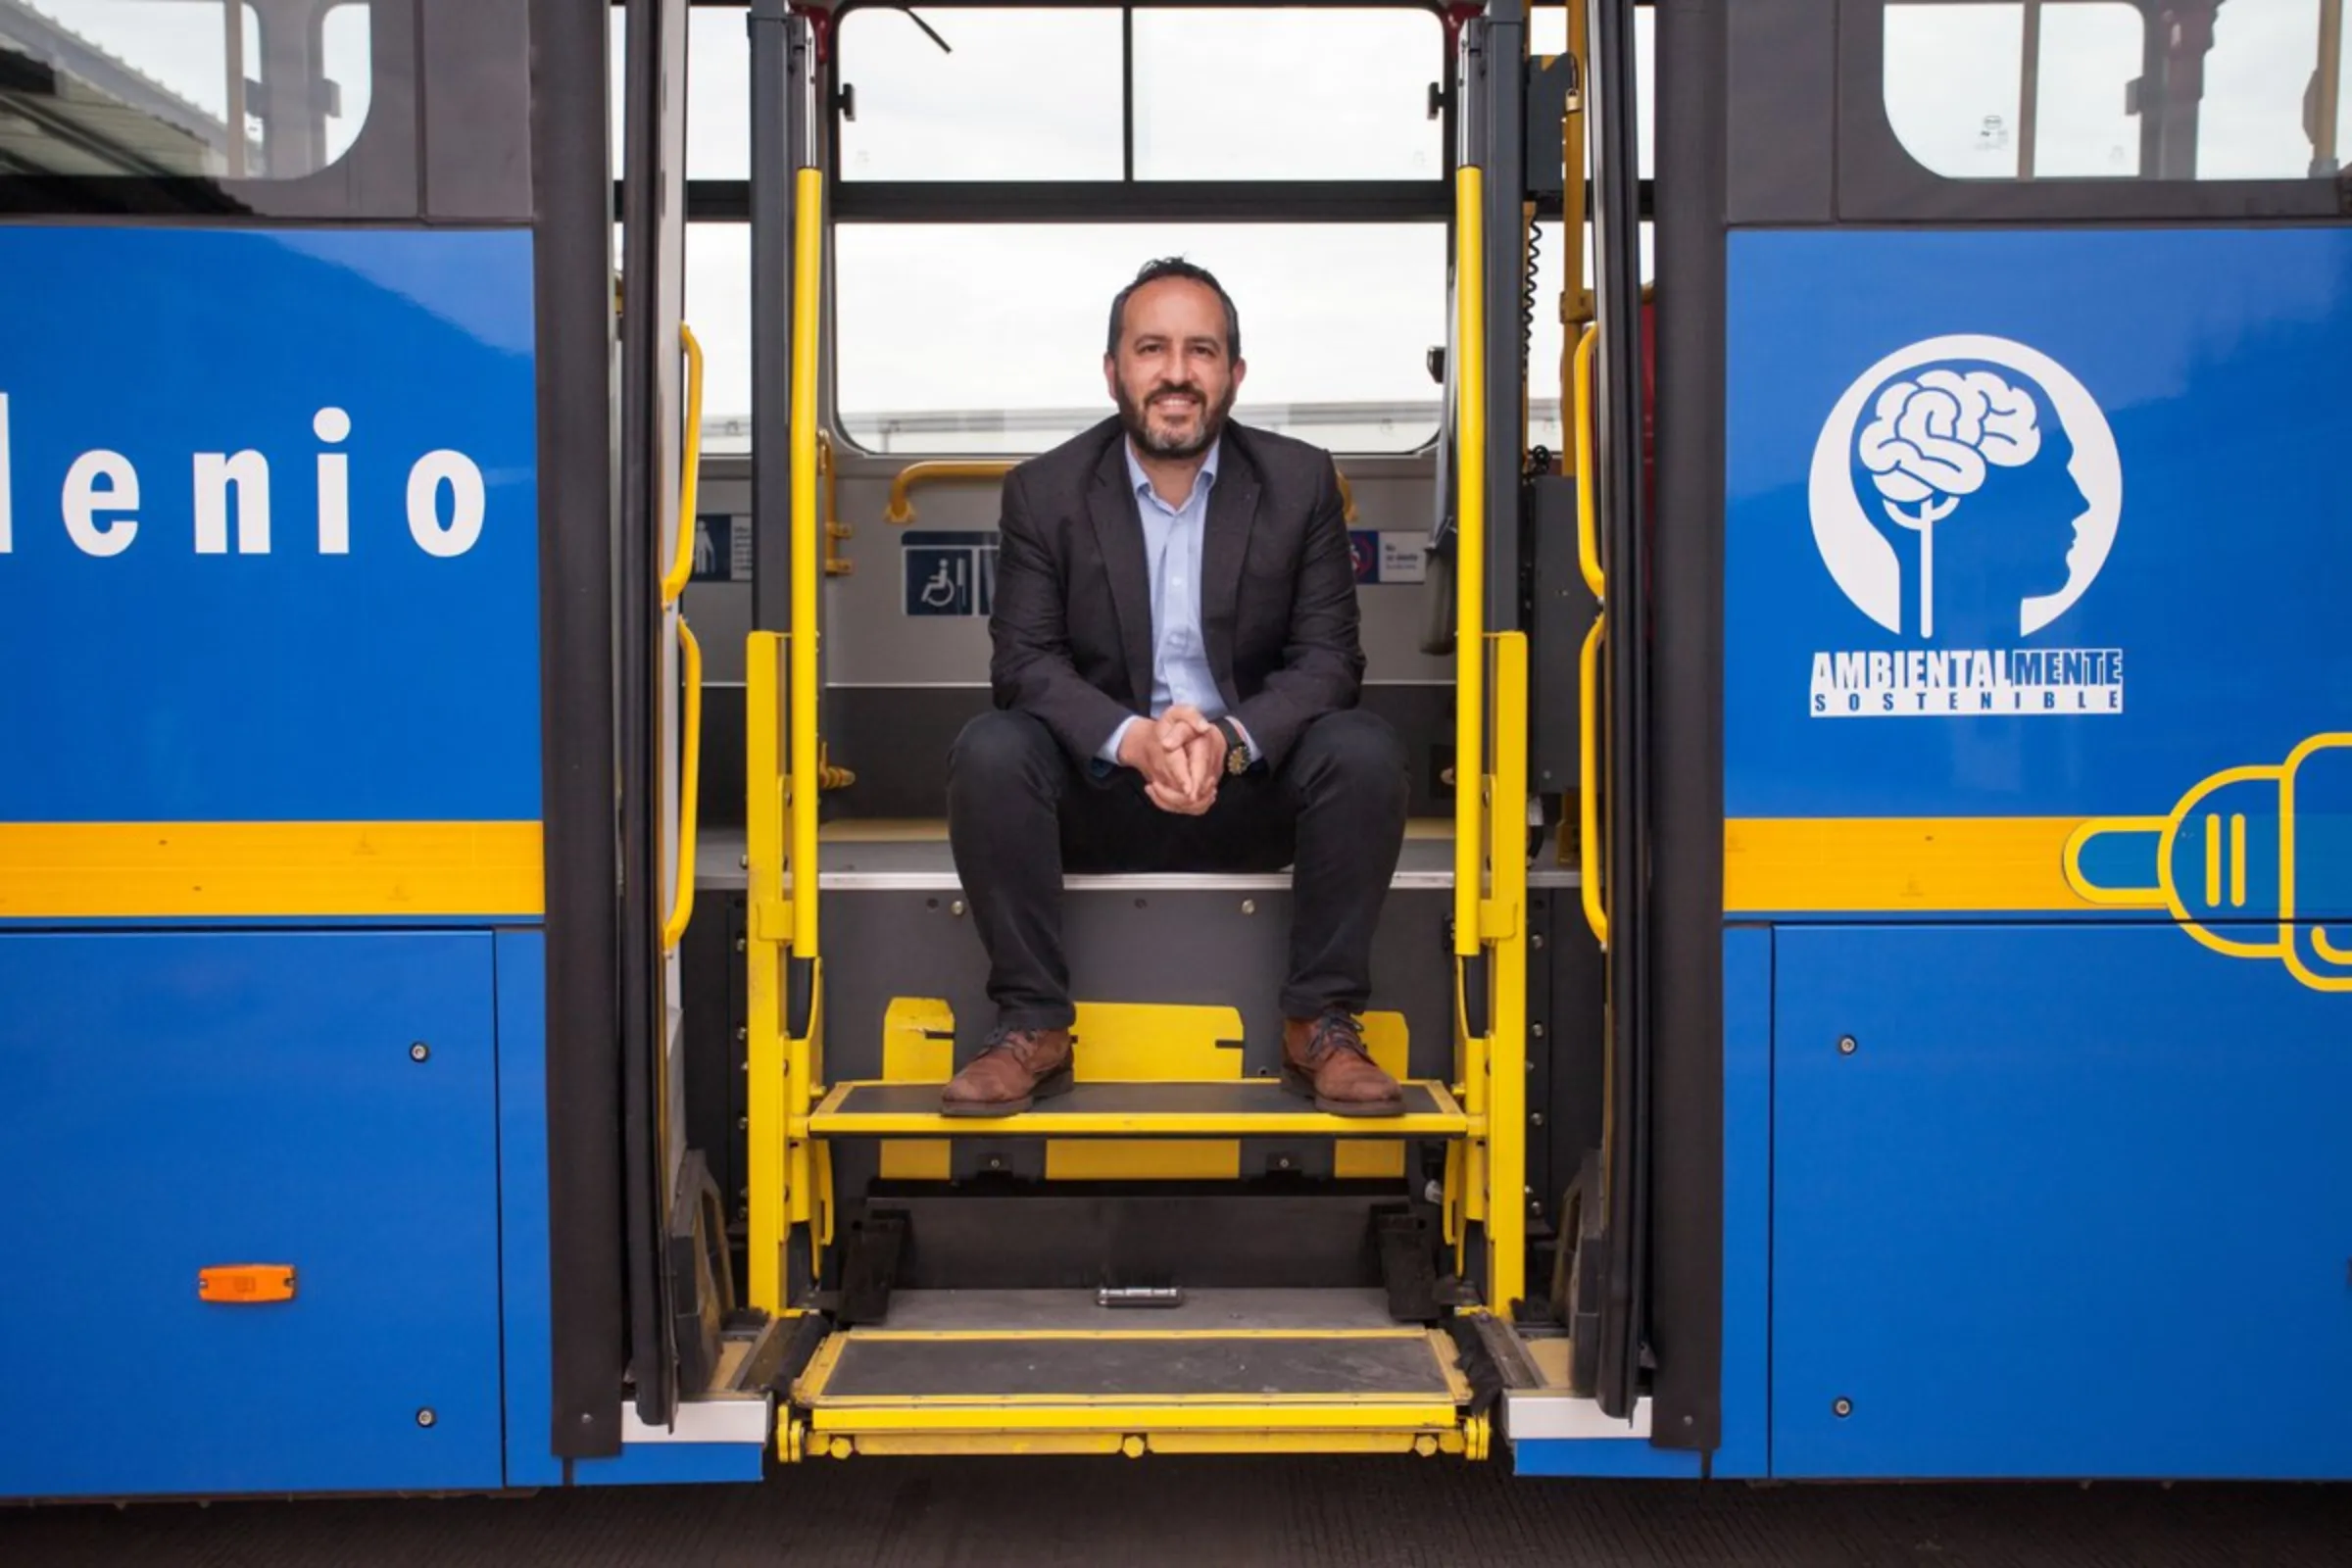 Felipe Ramirez, head of Bogota’s Transmilenio bus system, sits inside the door of an electric bus in Bogota, Colombia, April 21, 2021. About 350 electric buses now operate in the capital, with plans for 1,485 by 2022